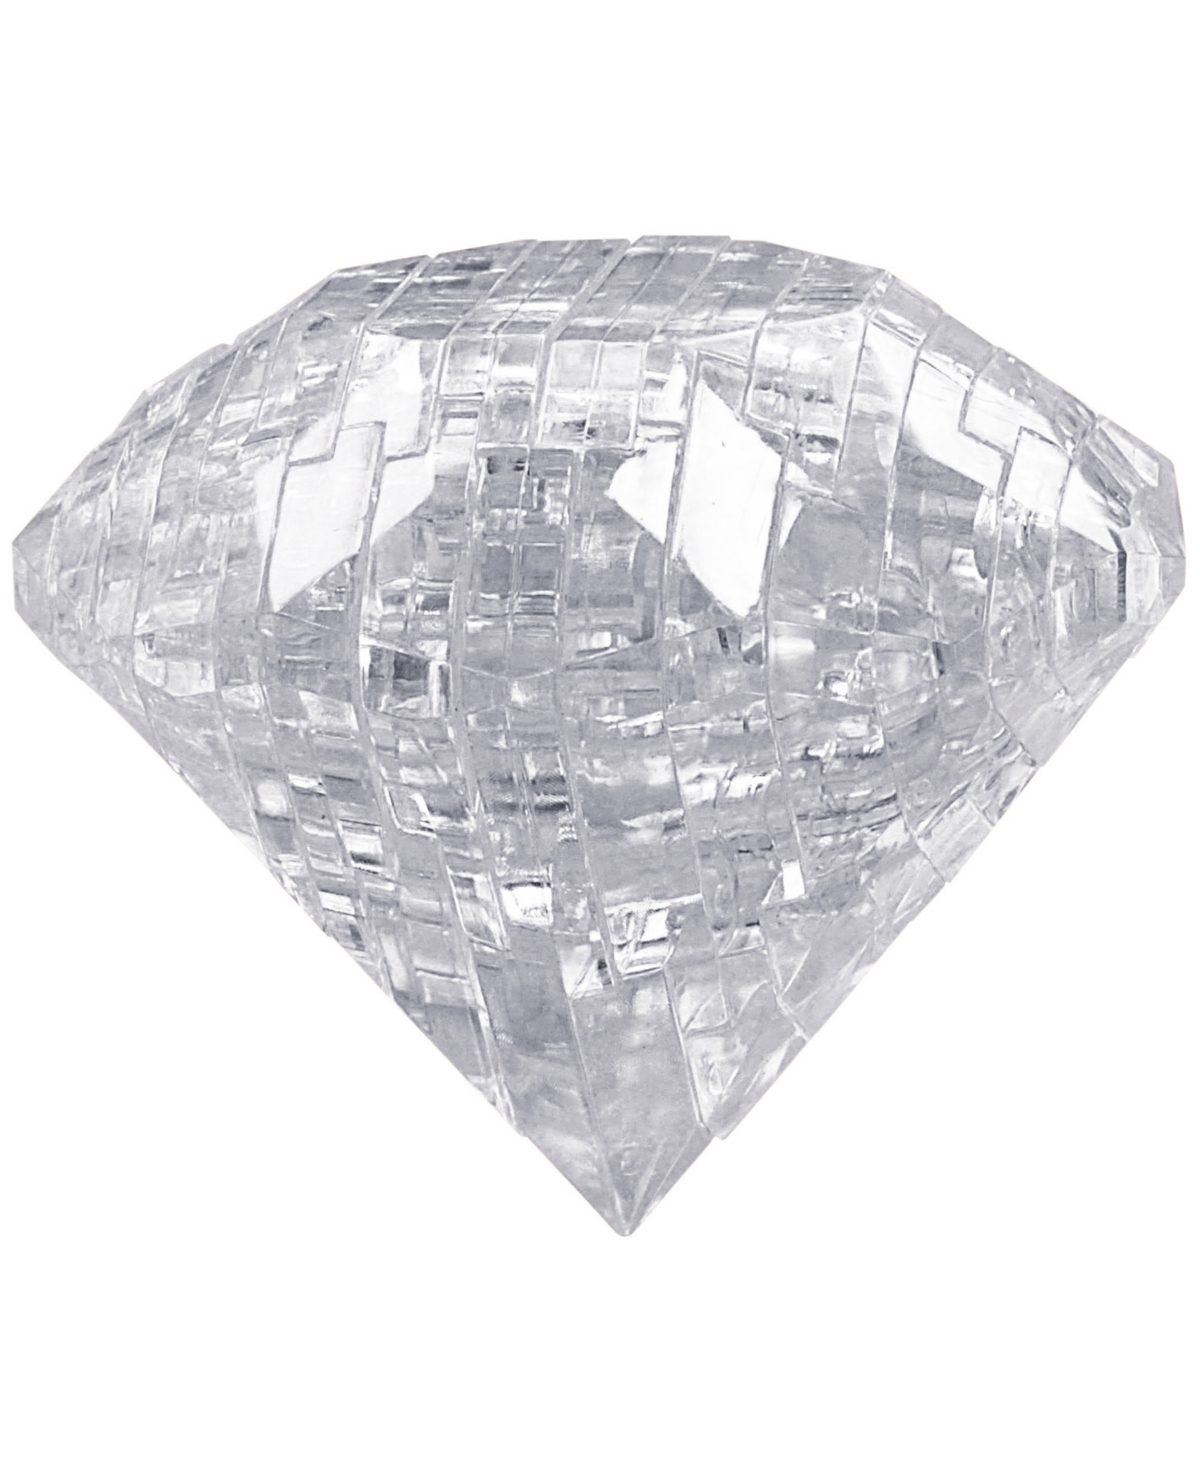 Areyougame Kids' 3d Crystal Puzzle In No Color